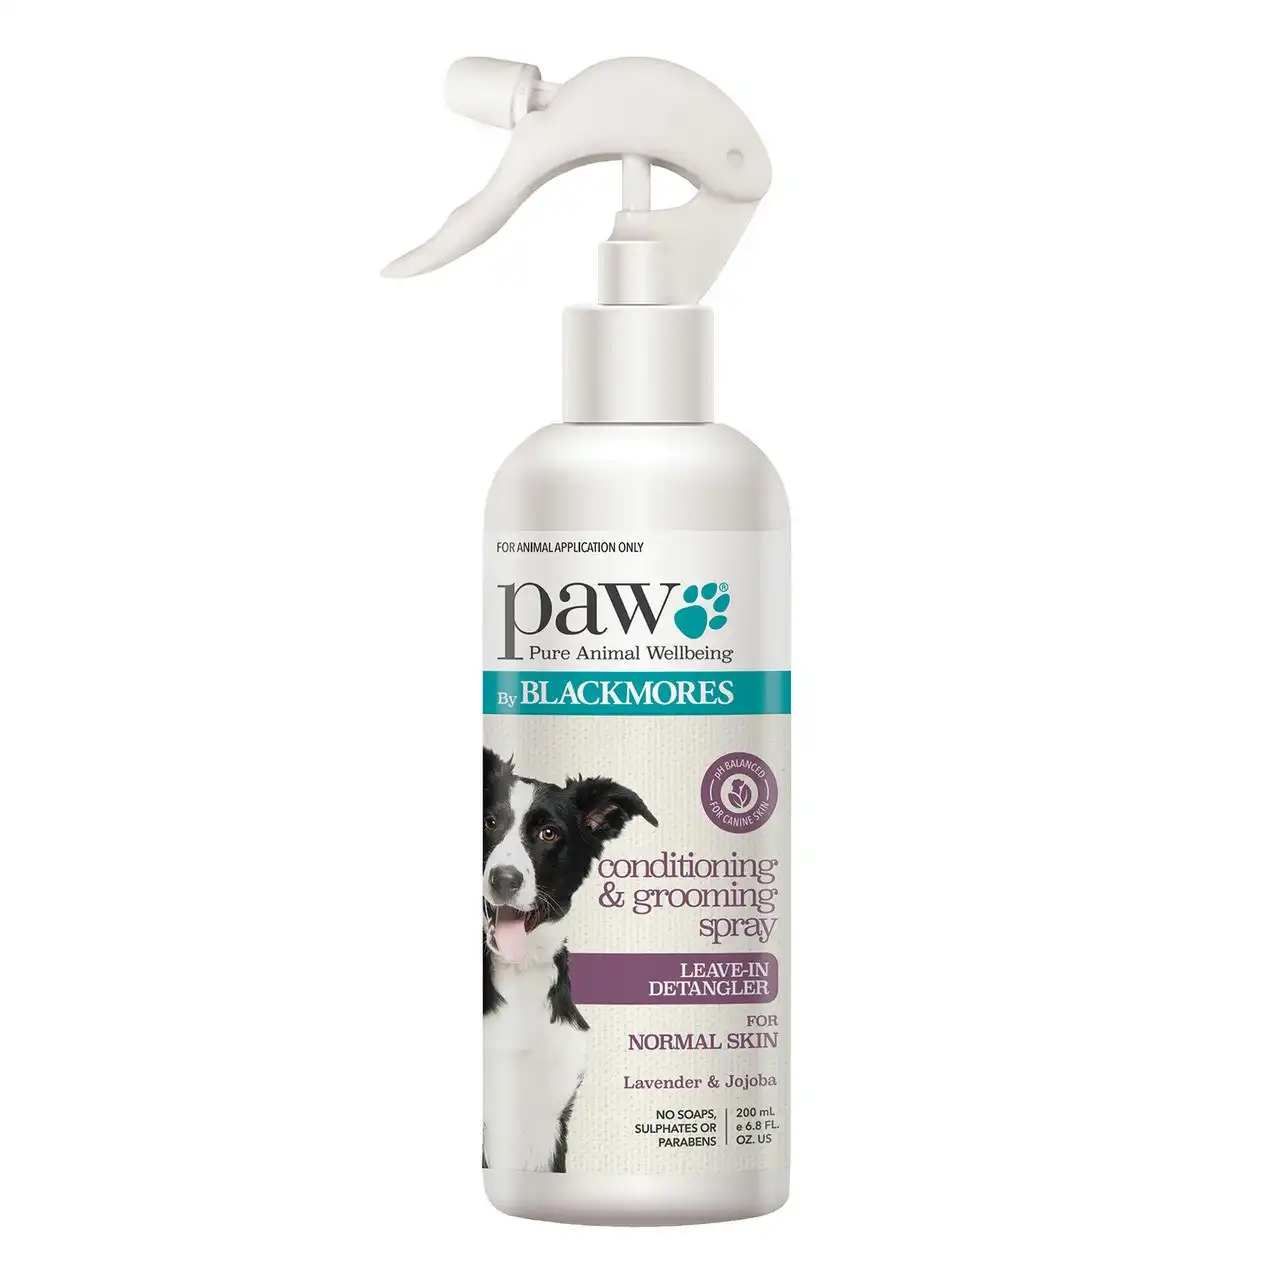 Paw By Blackmores Conditioning & Grooming Spray 200ml